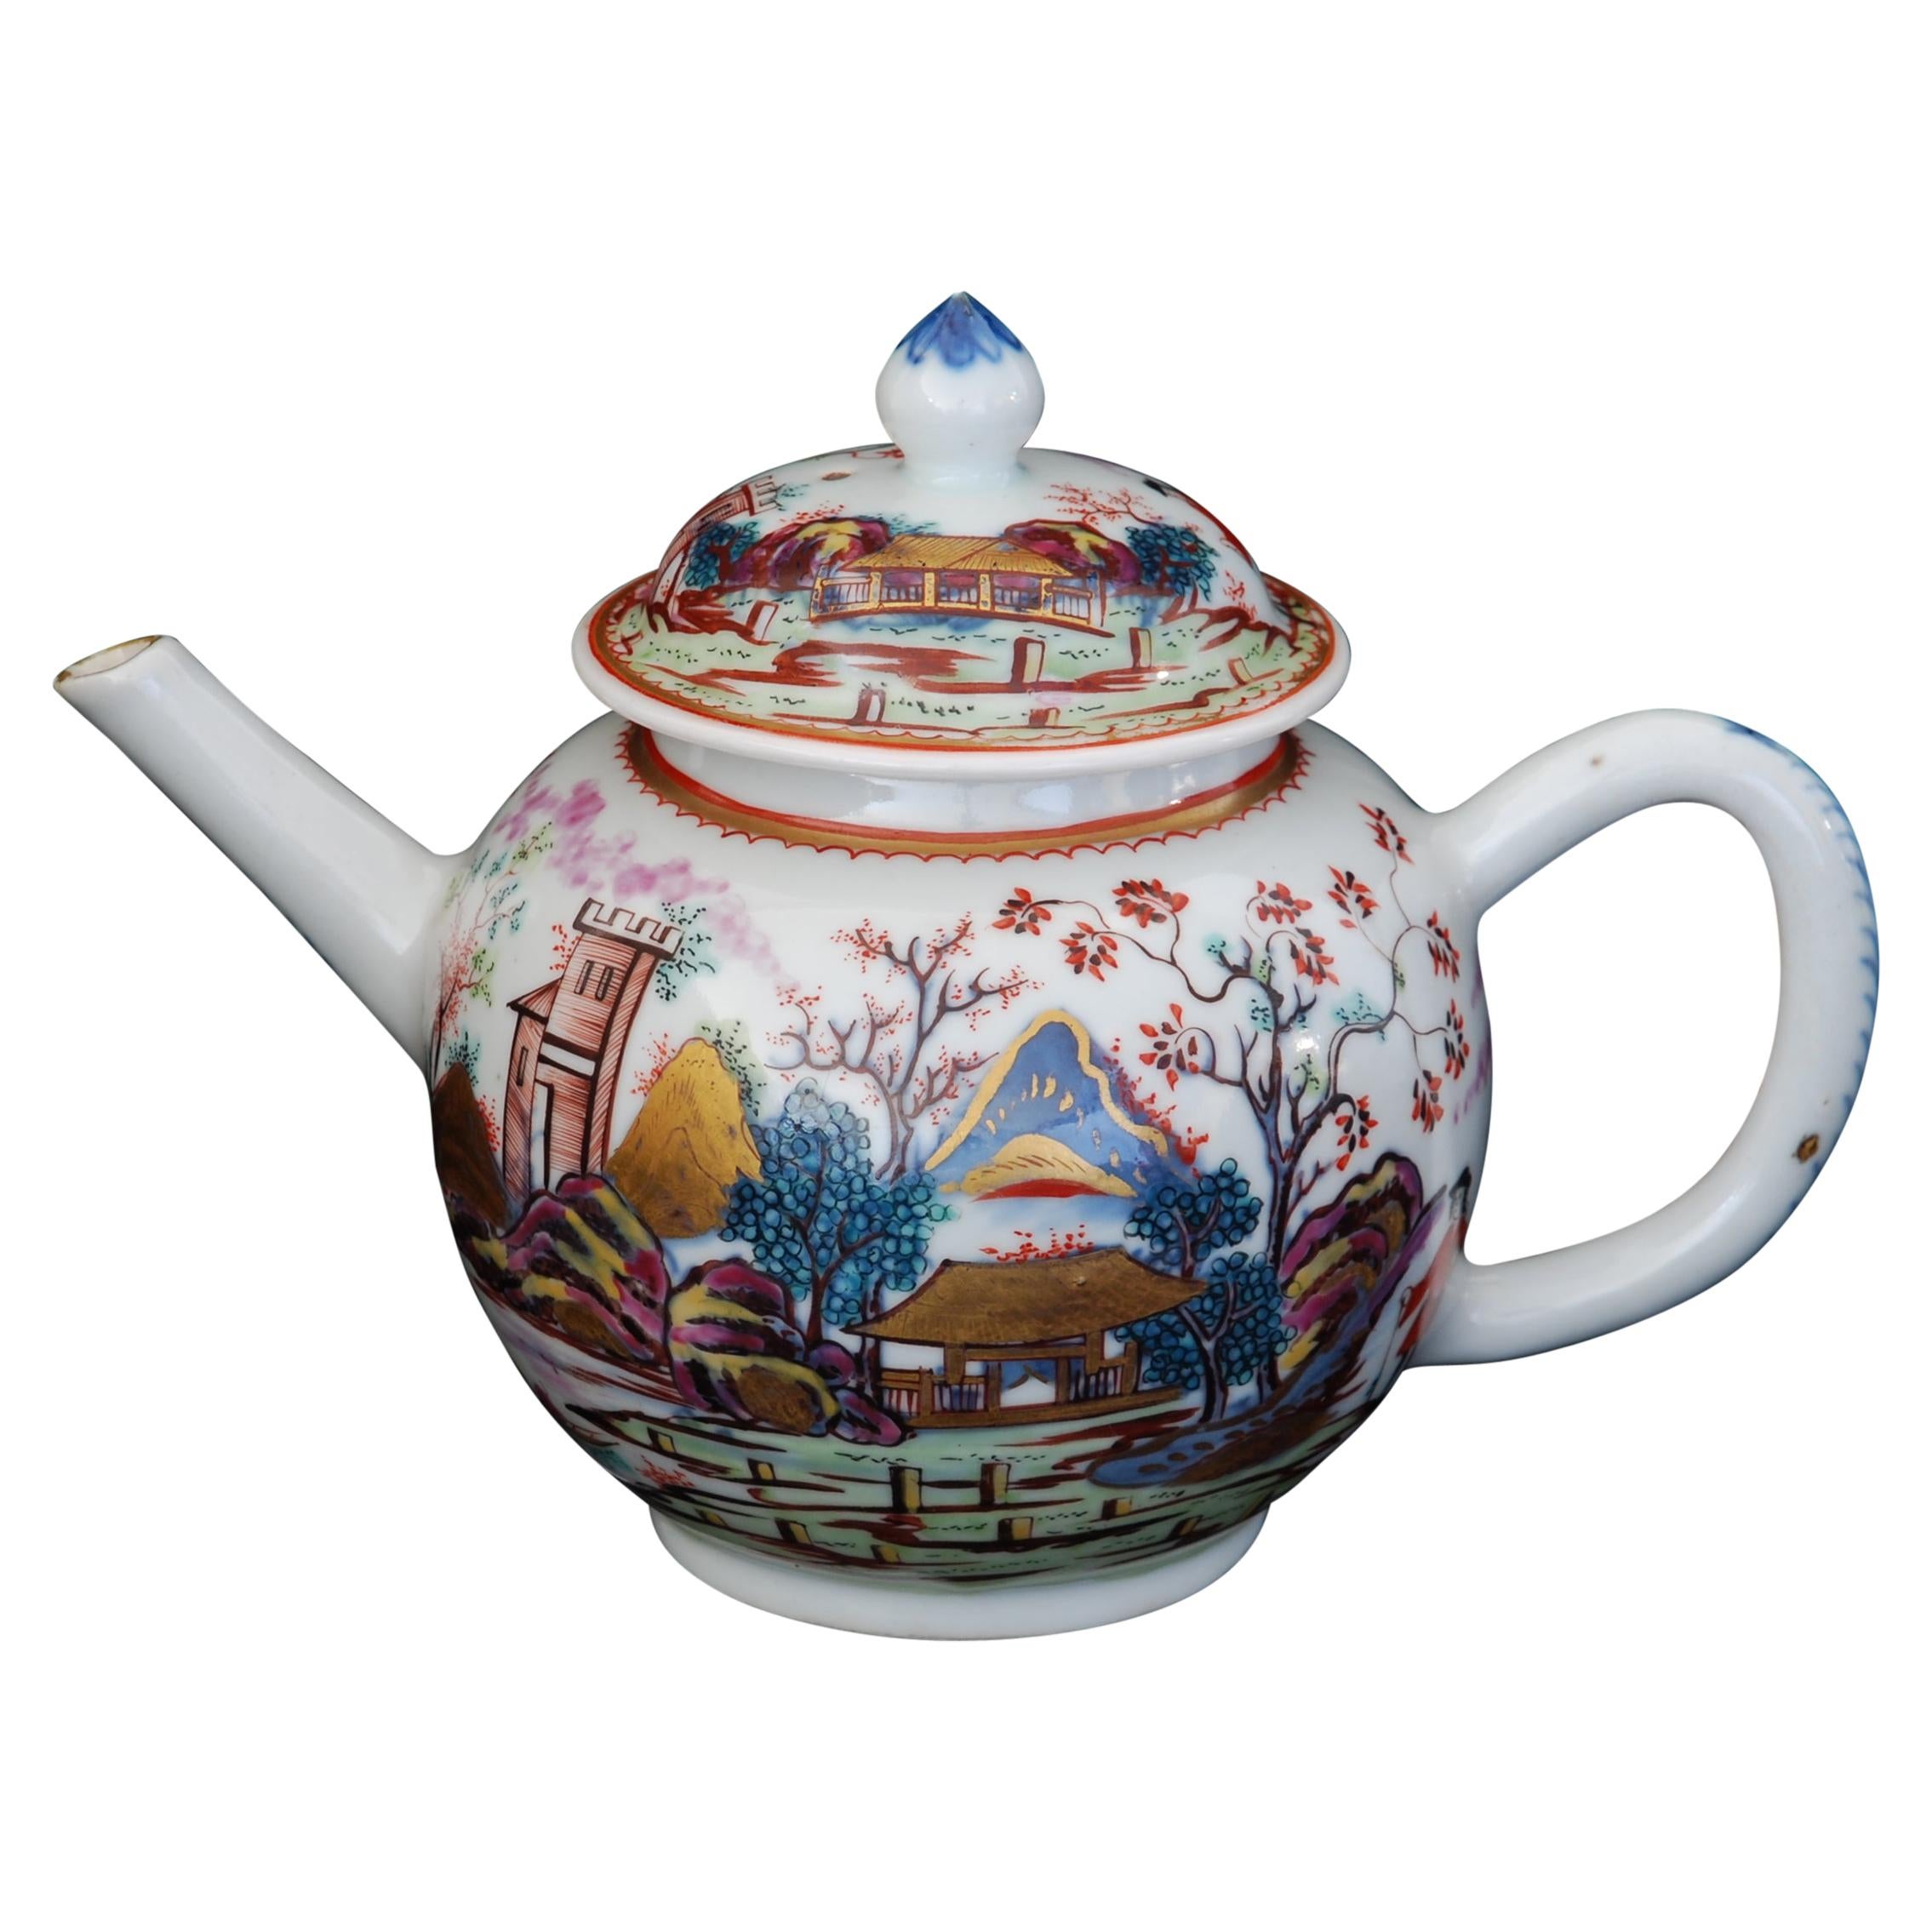 Teapot, Red Coat Pattern, China, circa 1740, Decorated in London by Giles